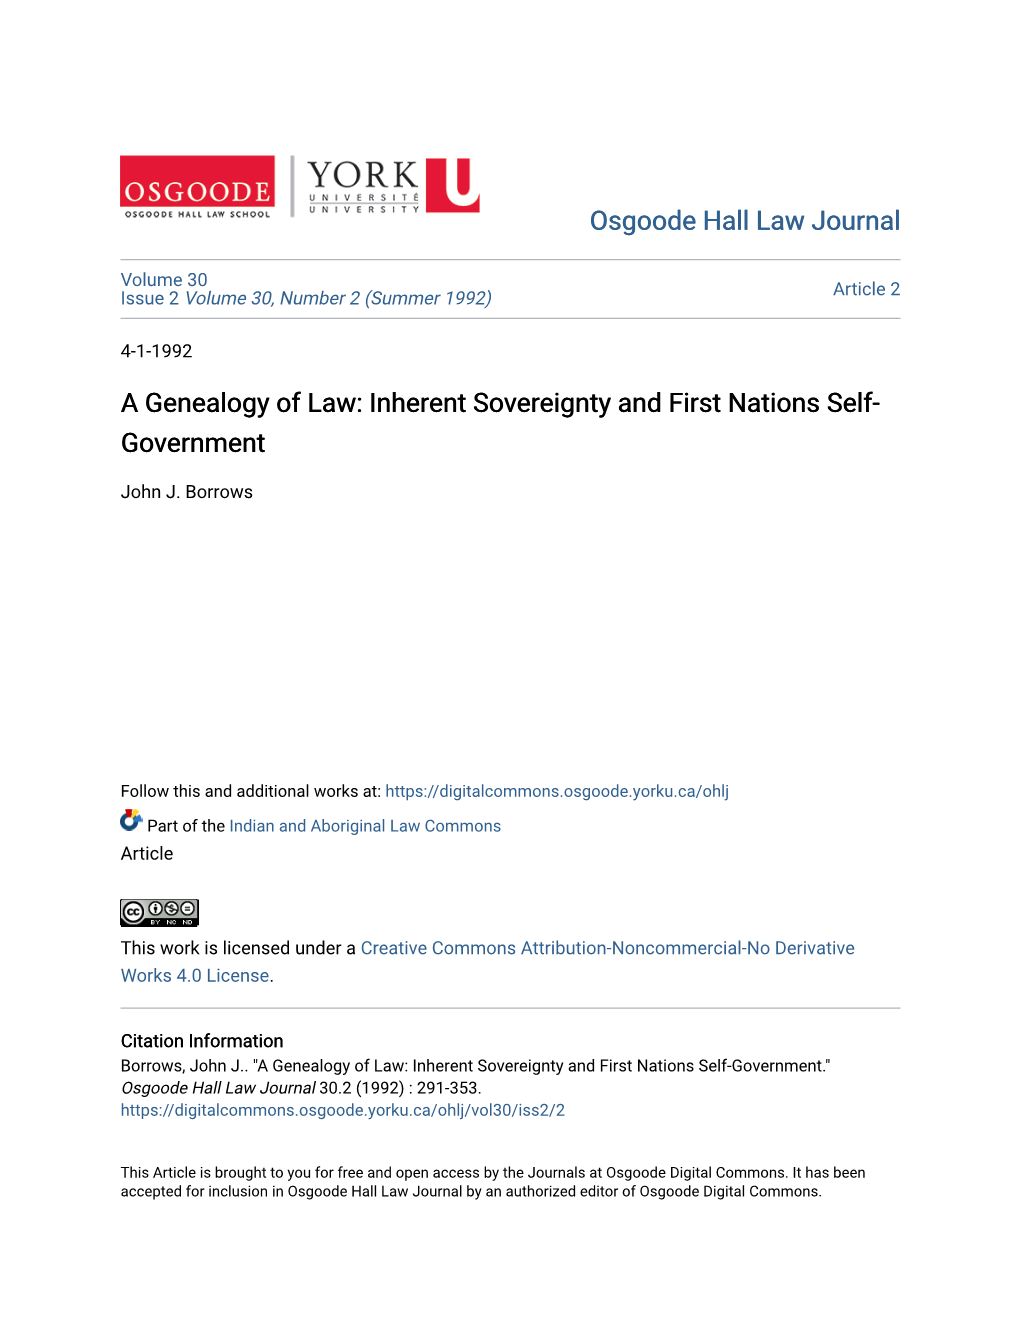 Inherent Sovereignty and First Nations Self-Government." Osgoode Hall Law Journal 30.2 (1992) : 291-353